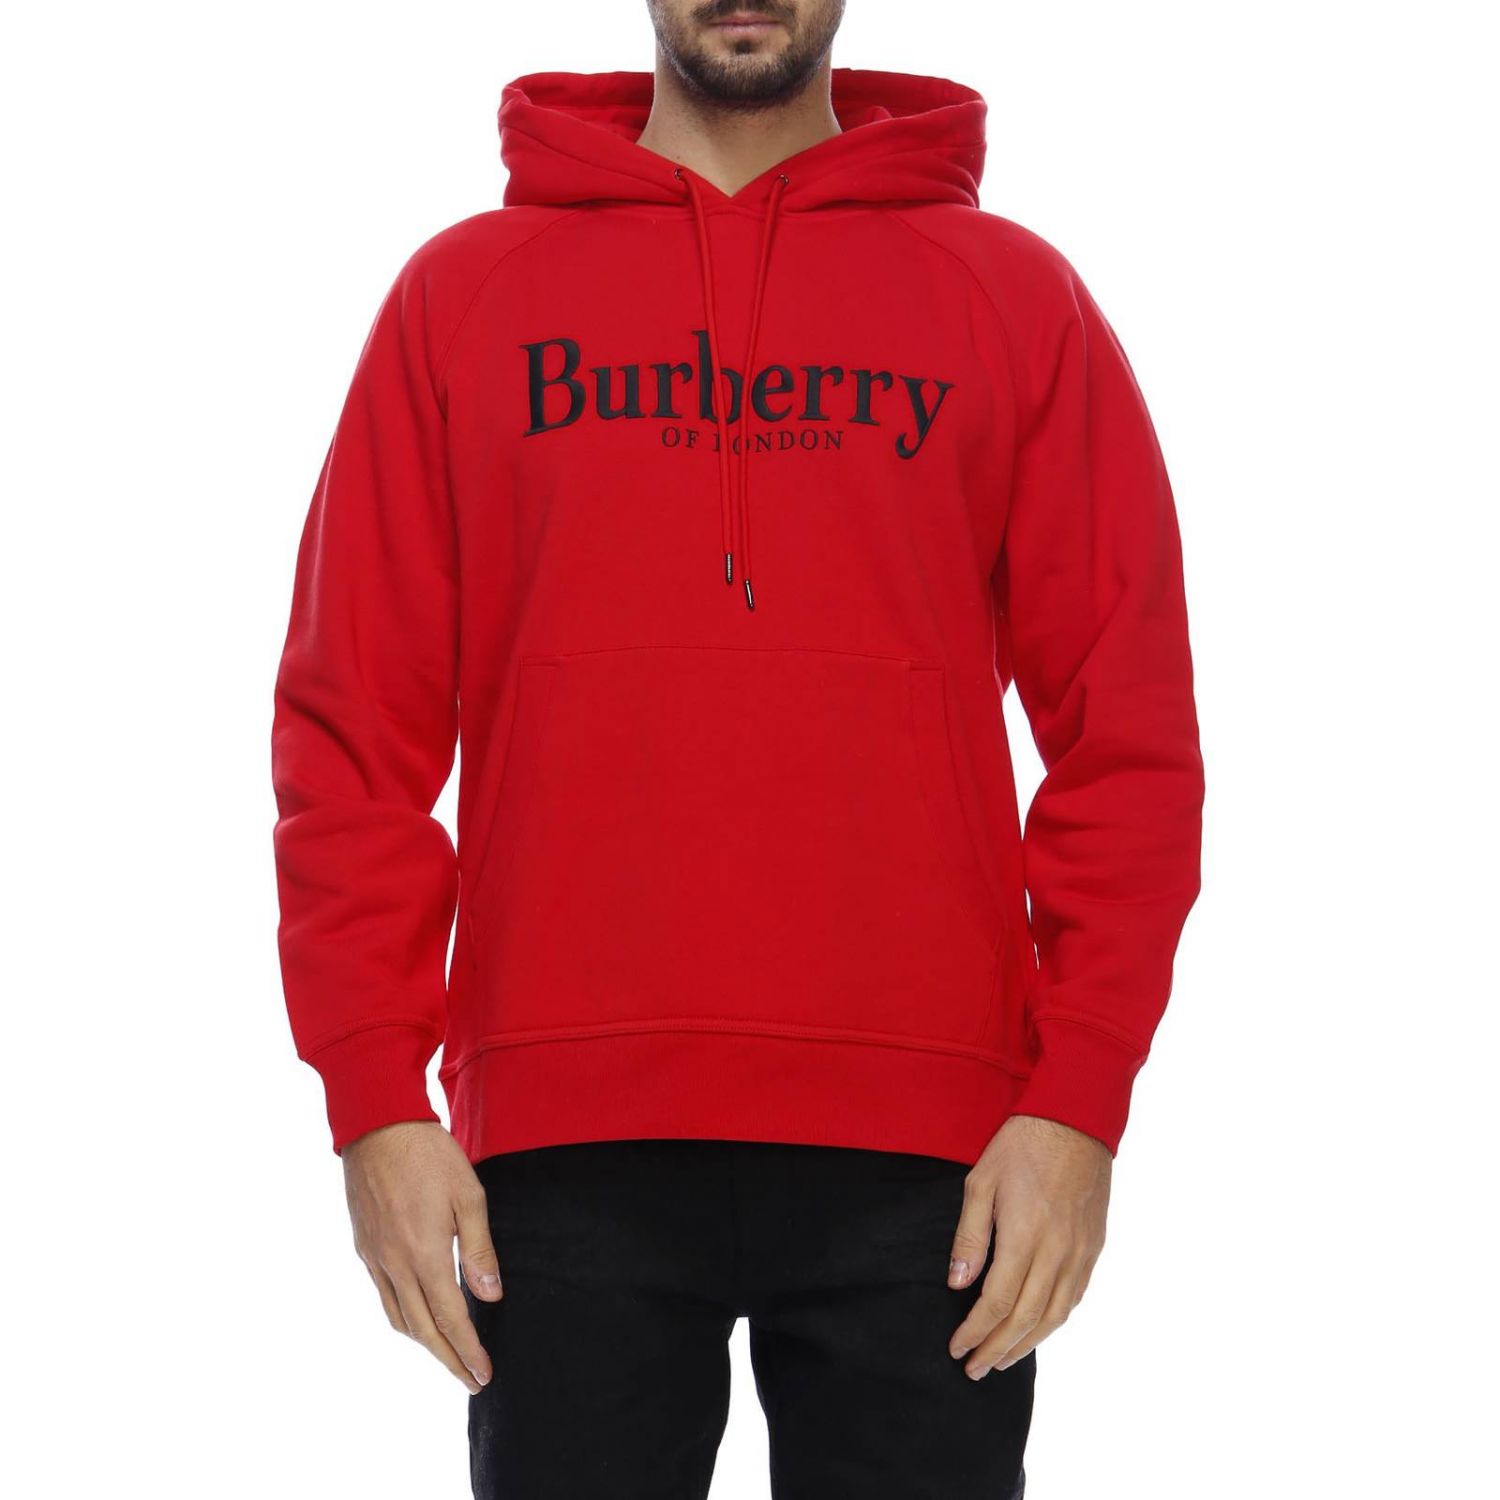 Jumper Burberry 8007833 ABYQI Giglio UK